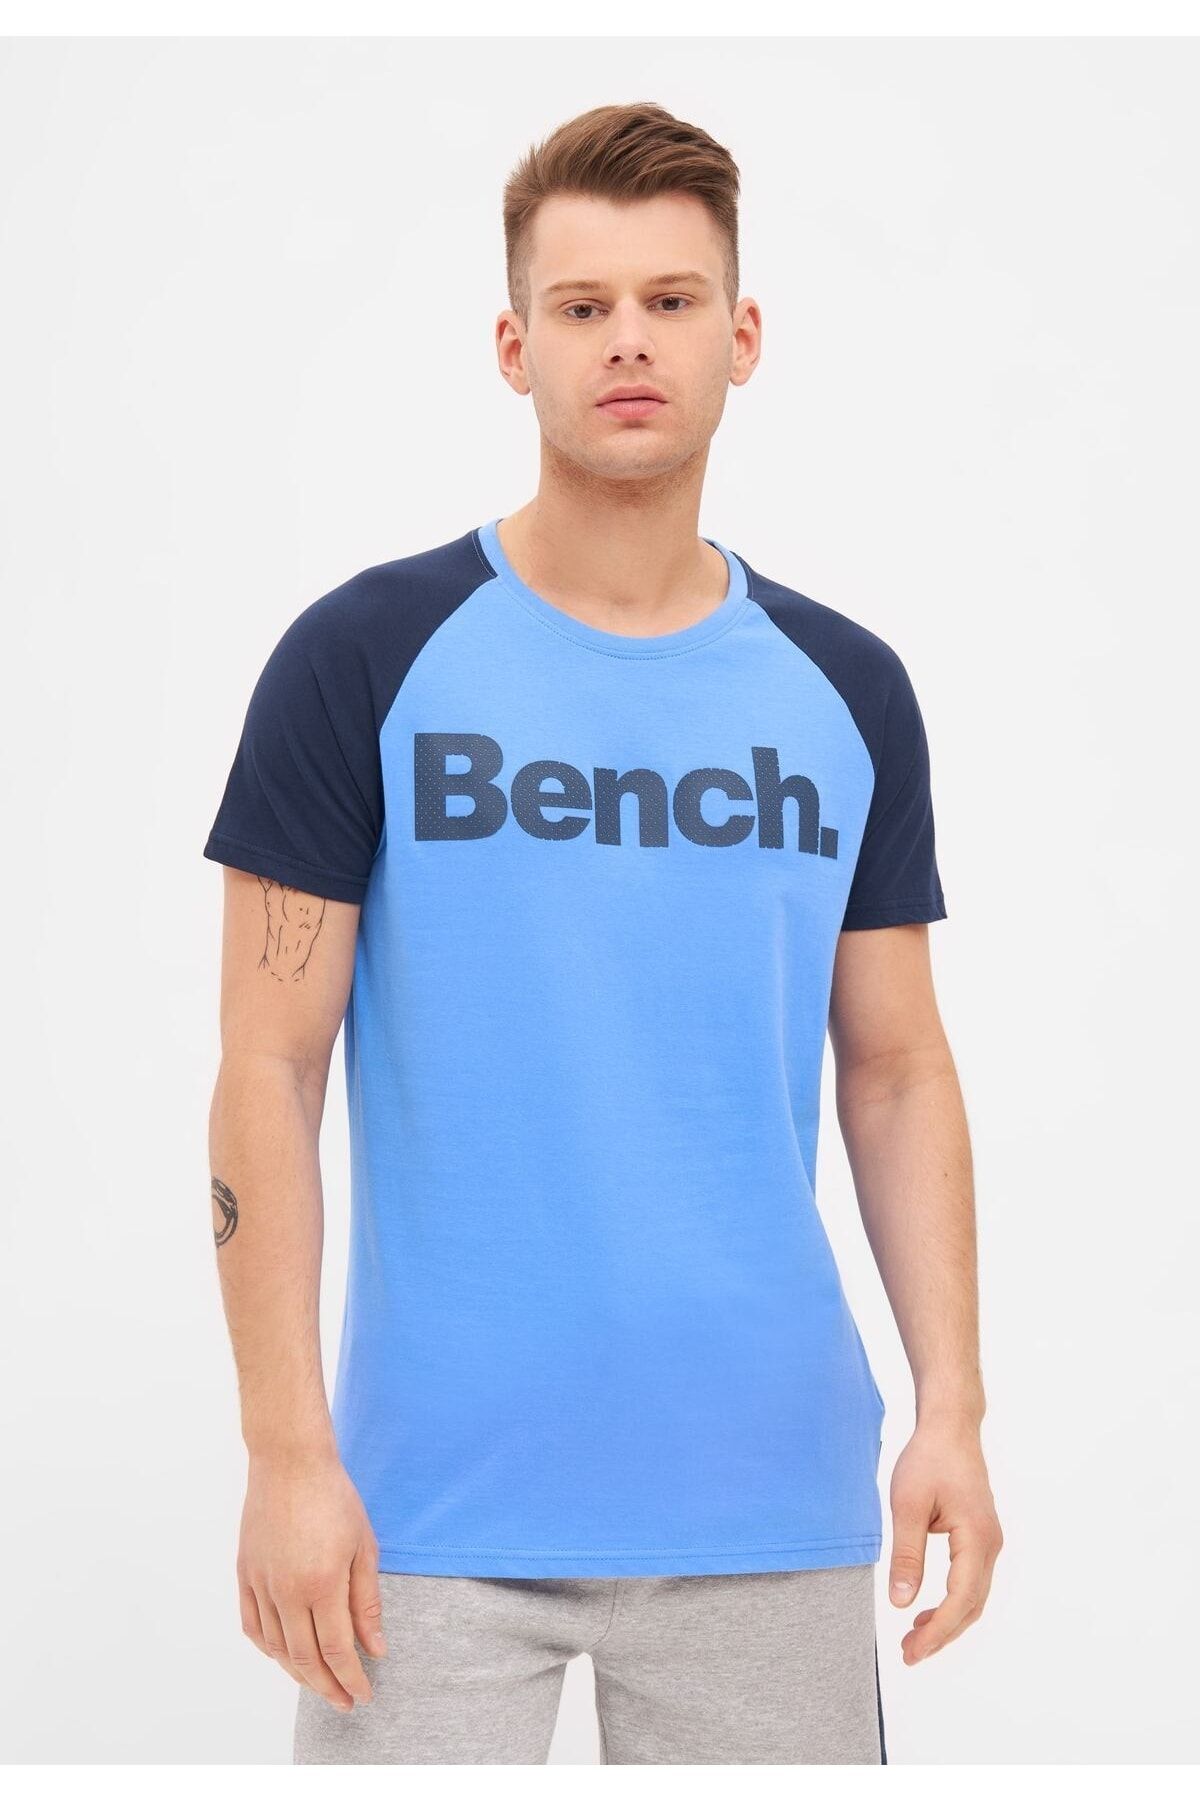 BENCH T-Shirt - Blue - Trendyol - Fitted